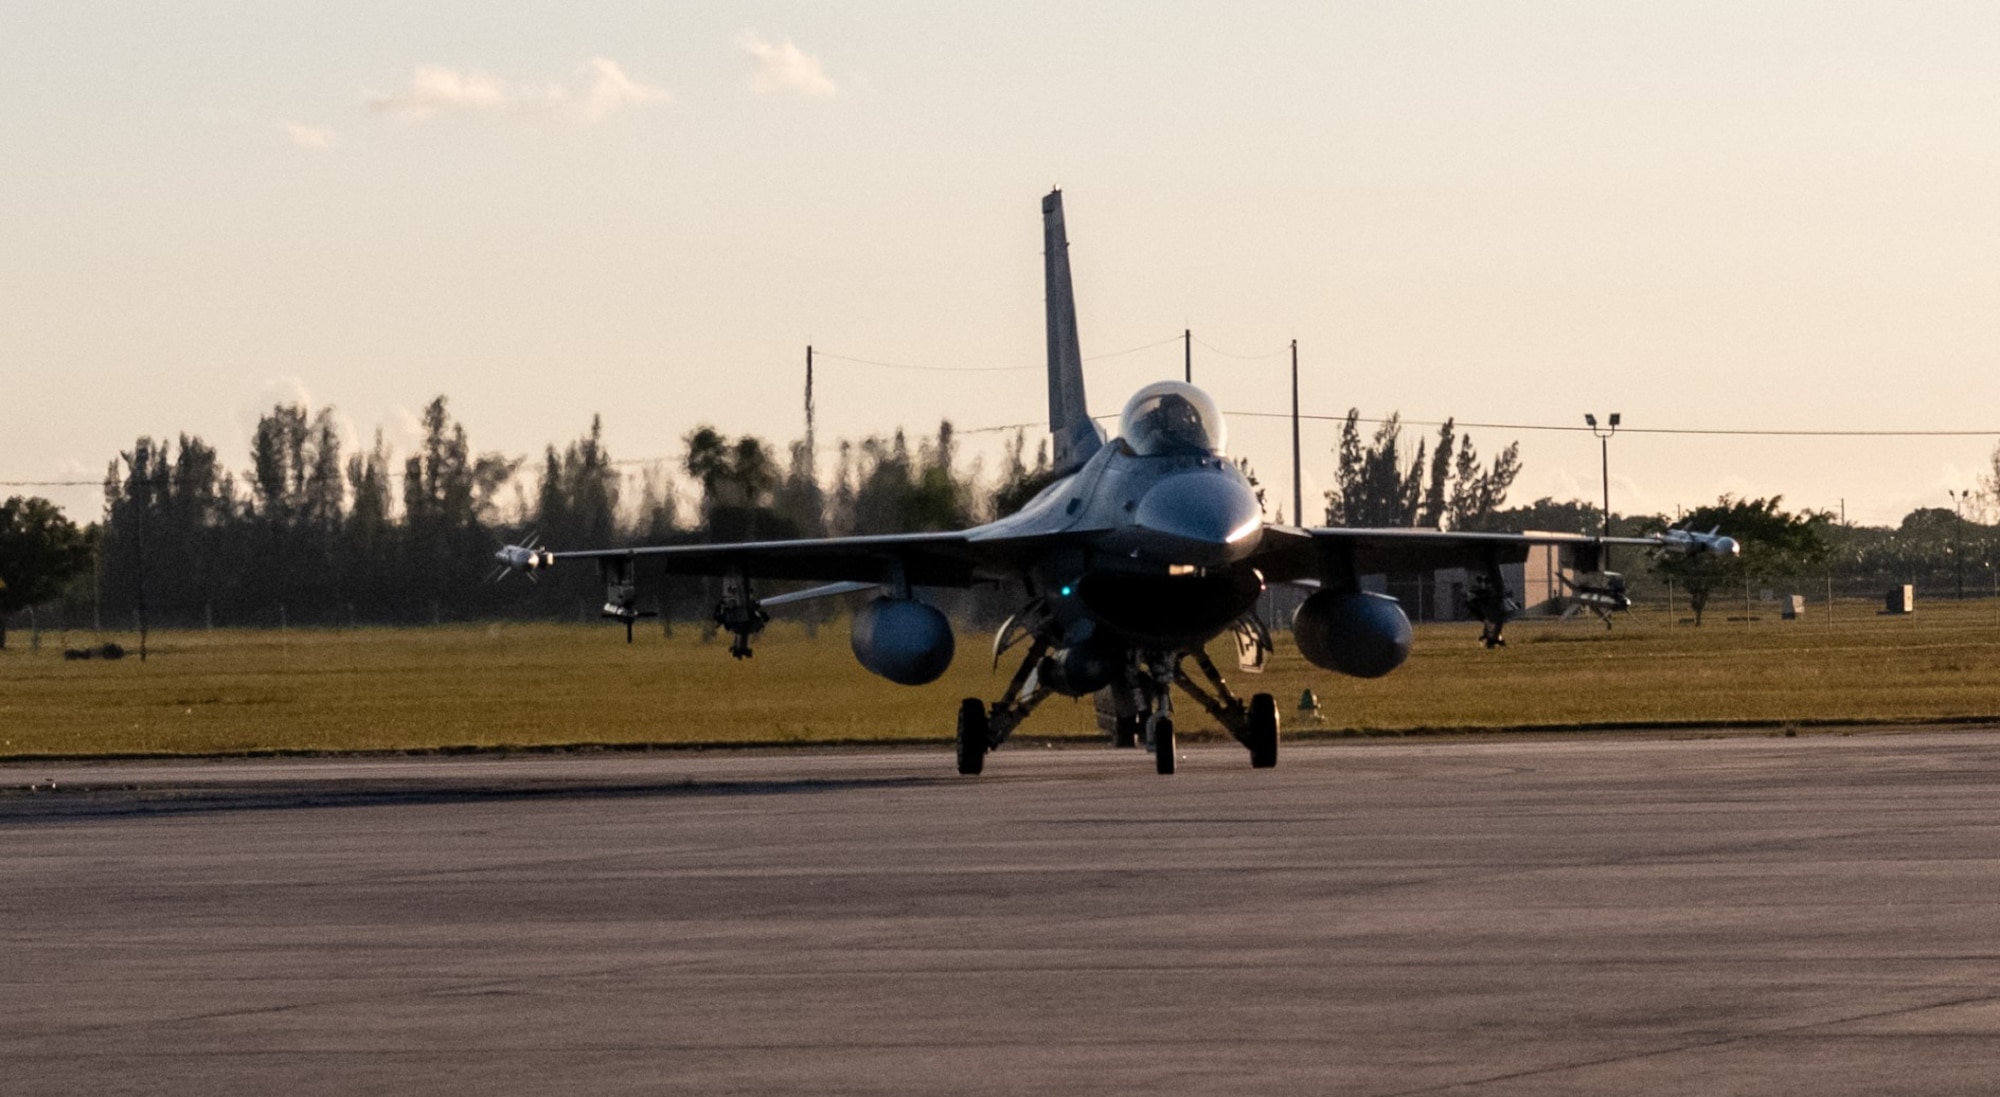 Lt. Col. Joseph “Hooter” Feheley taxis back to the parking area after completing his final flight before retirement at Homestead Air Reserve Base, Florida, Dec.10, 2021. (U.S. Air Force photo by Master Sgt. Allissa Landgraff)